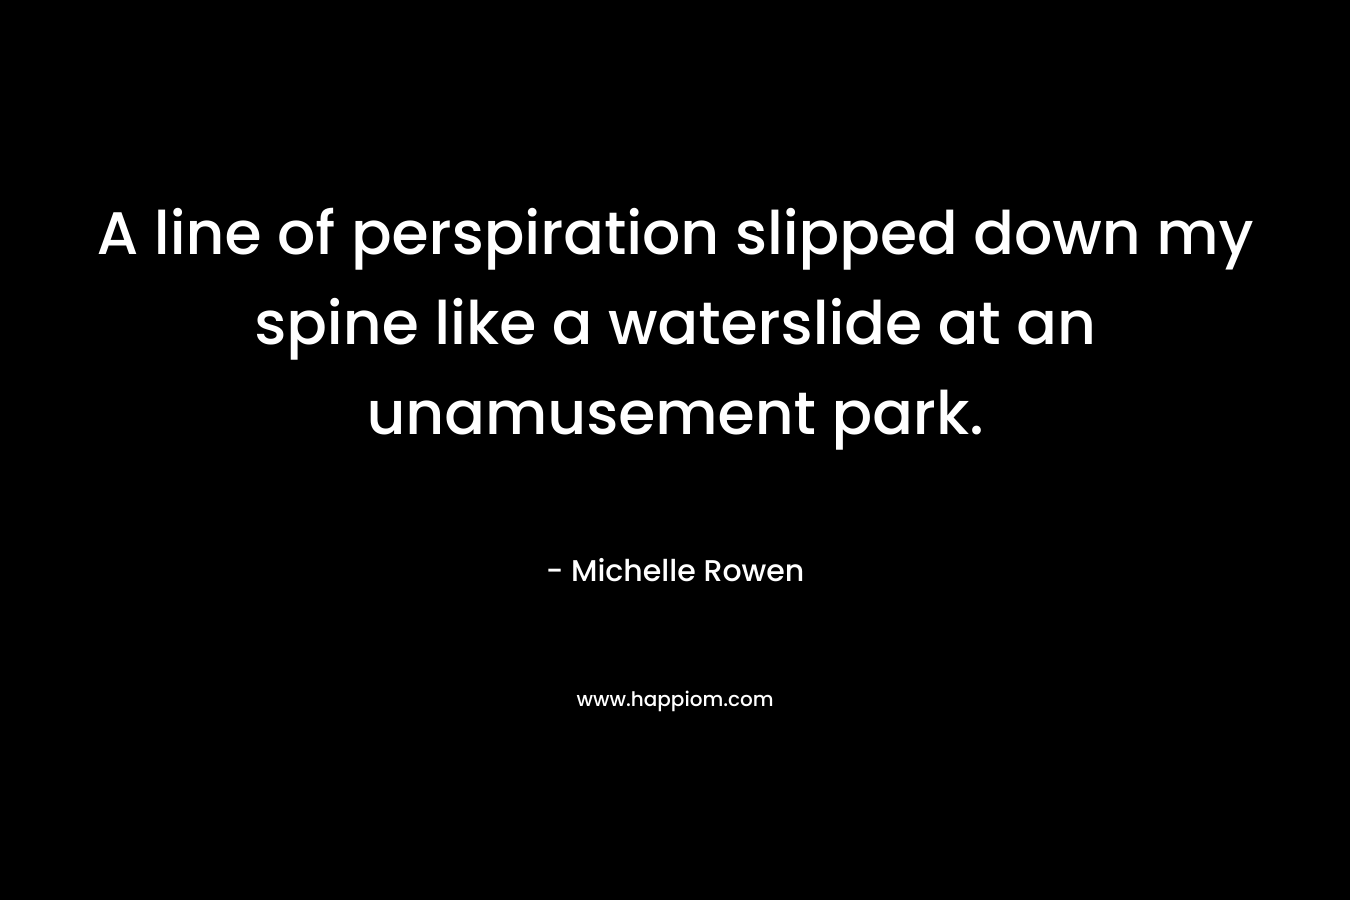 A line of perspiration slipped down my spine like a waterslide at an unamusement park. – Michelle Rowen